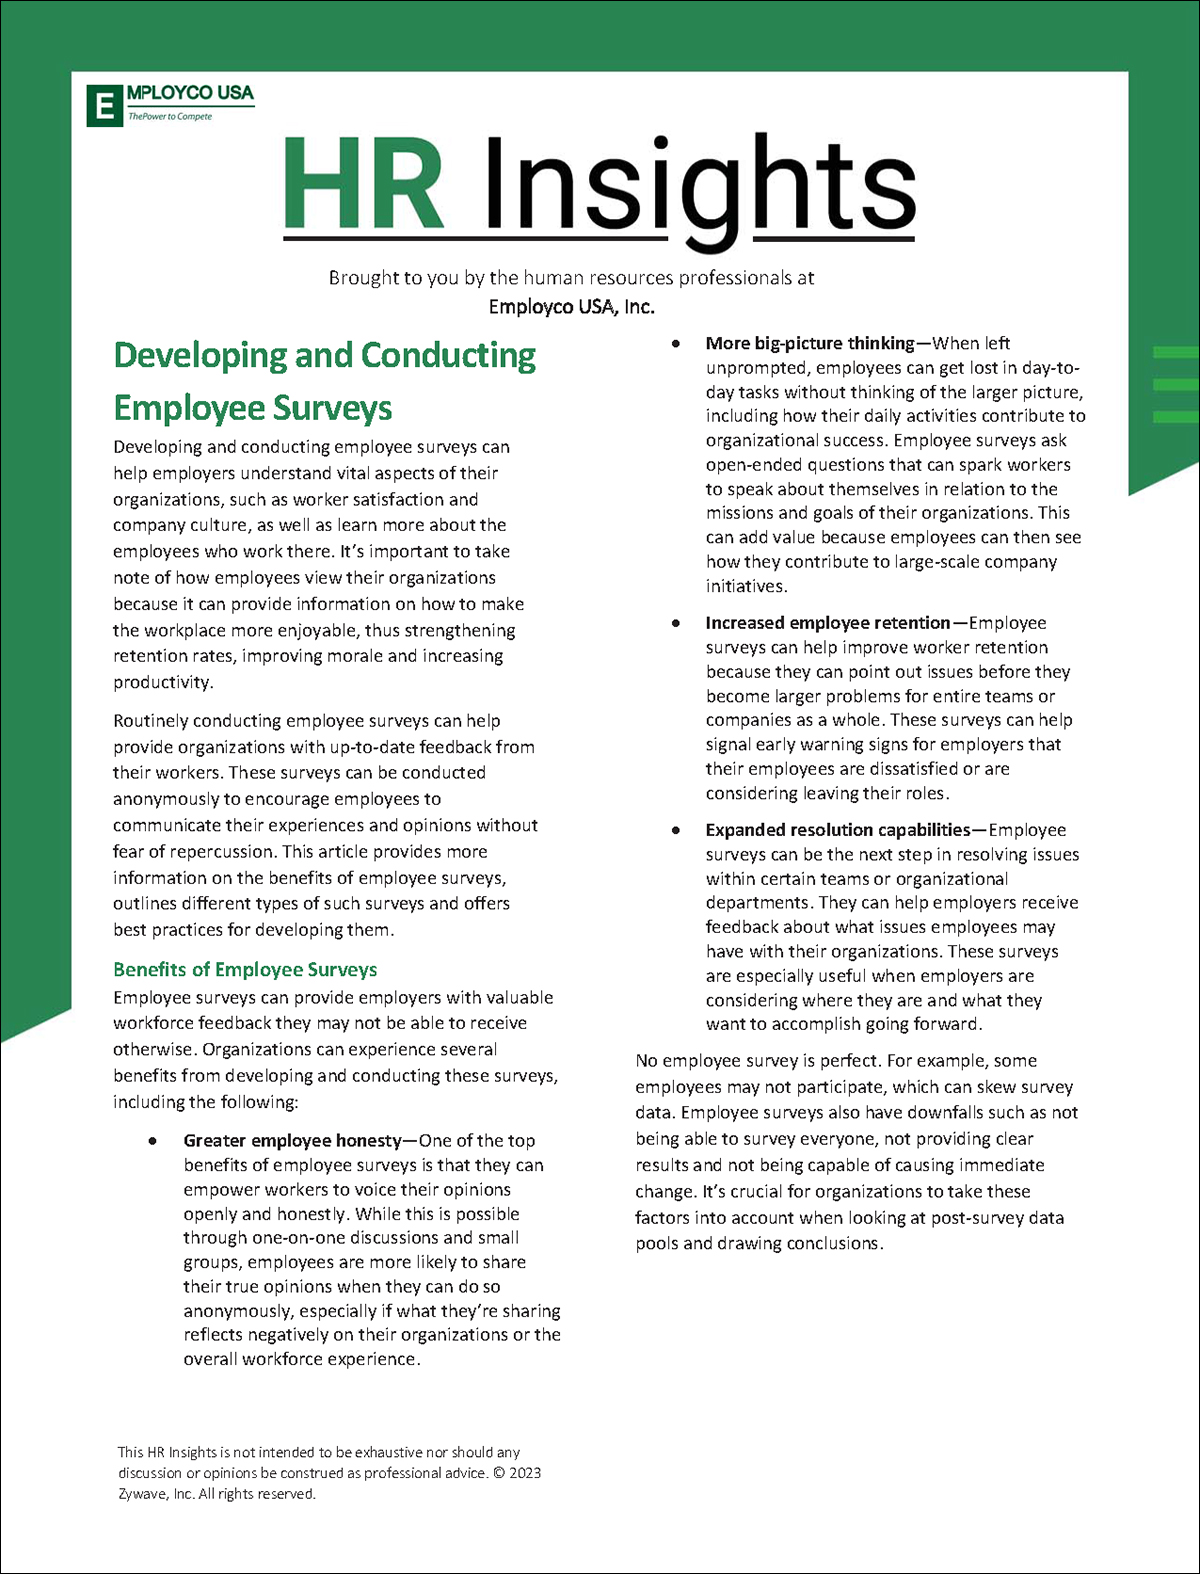 HR Insights: Developing and Conducting Employee Surveys